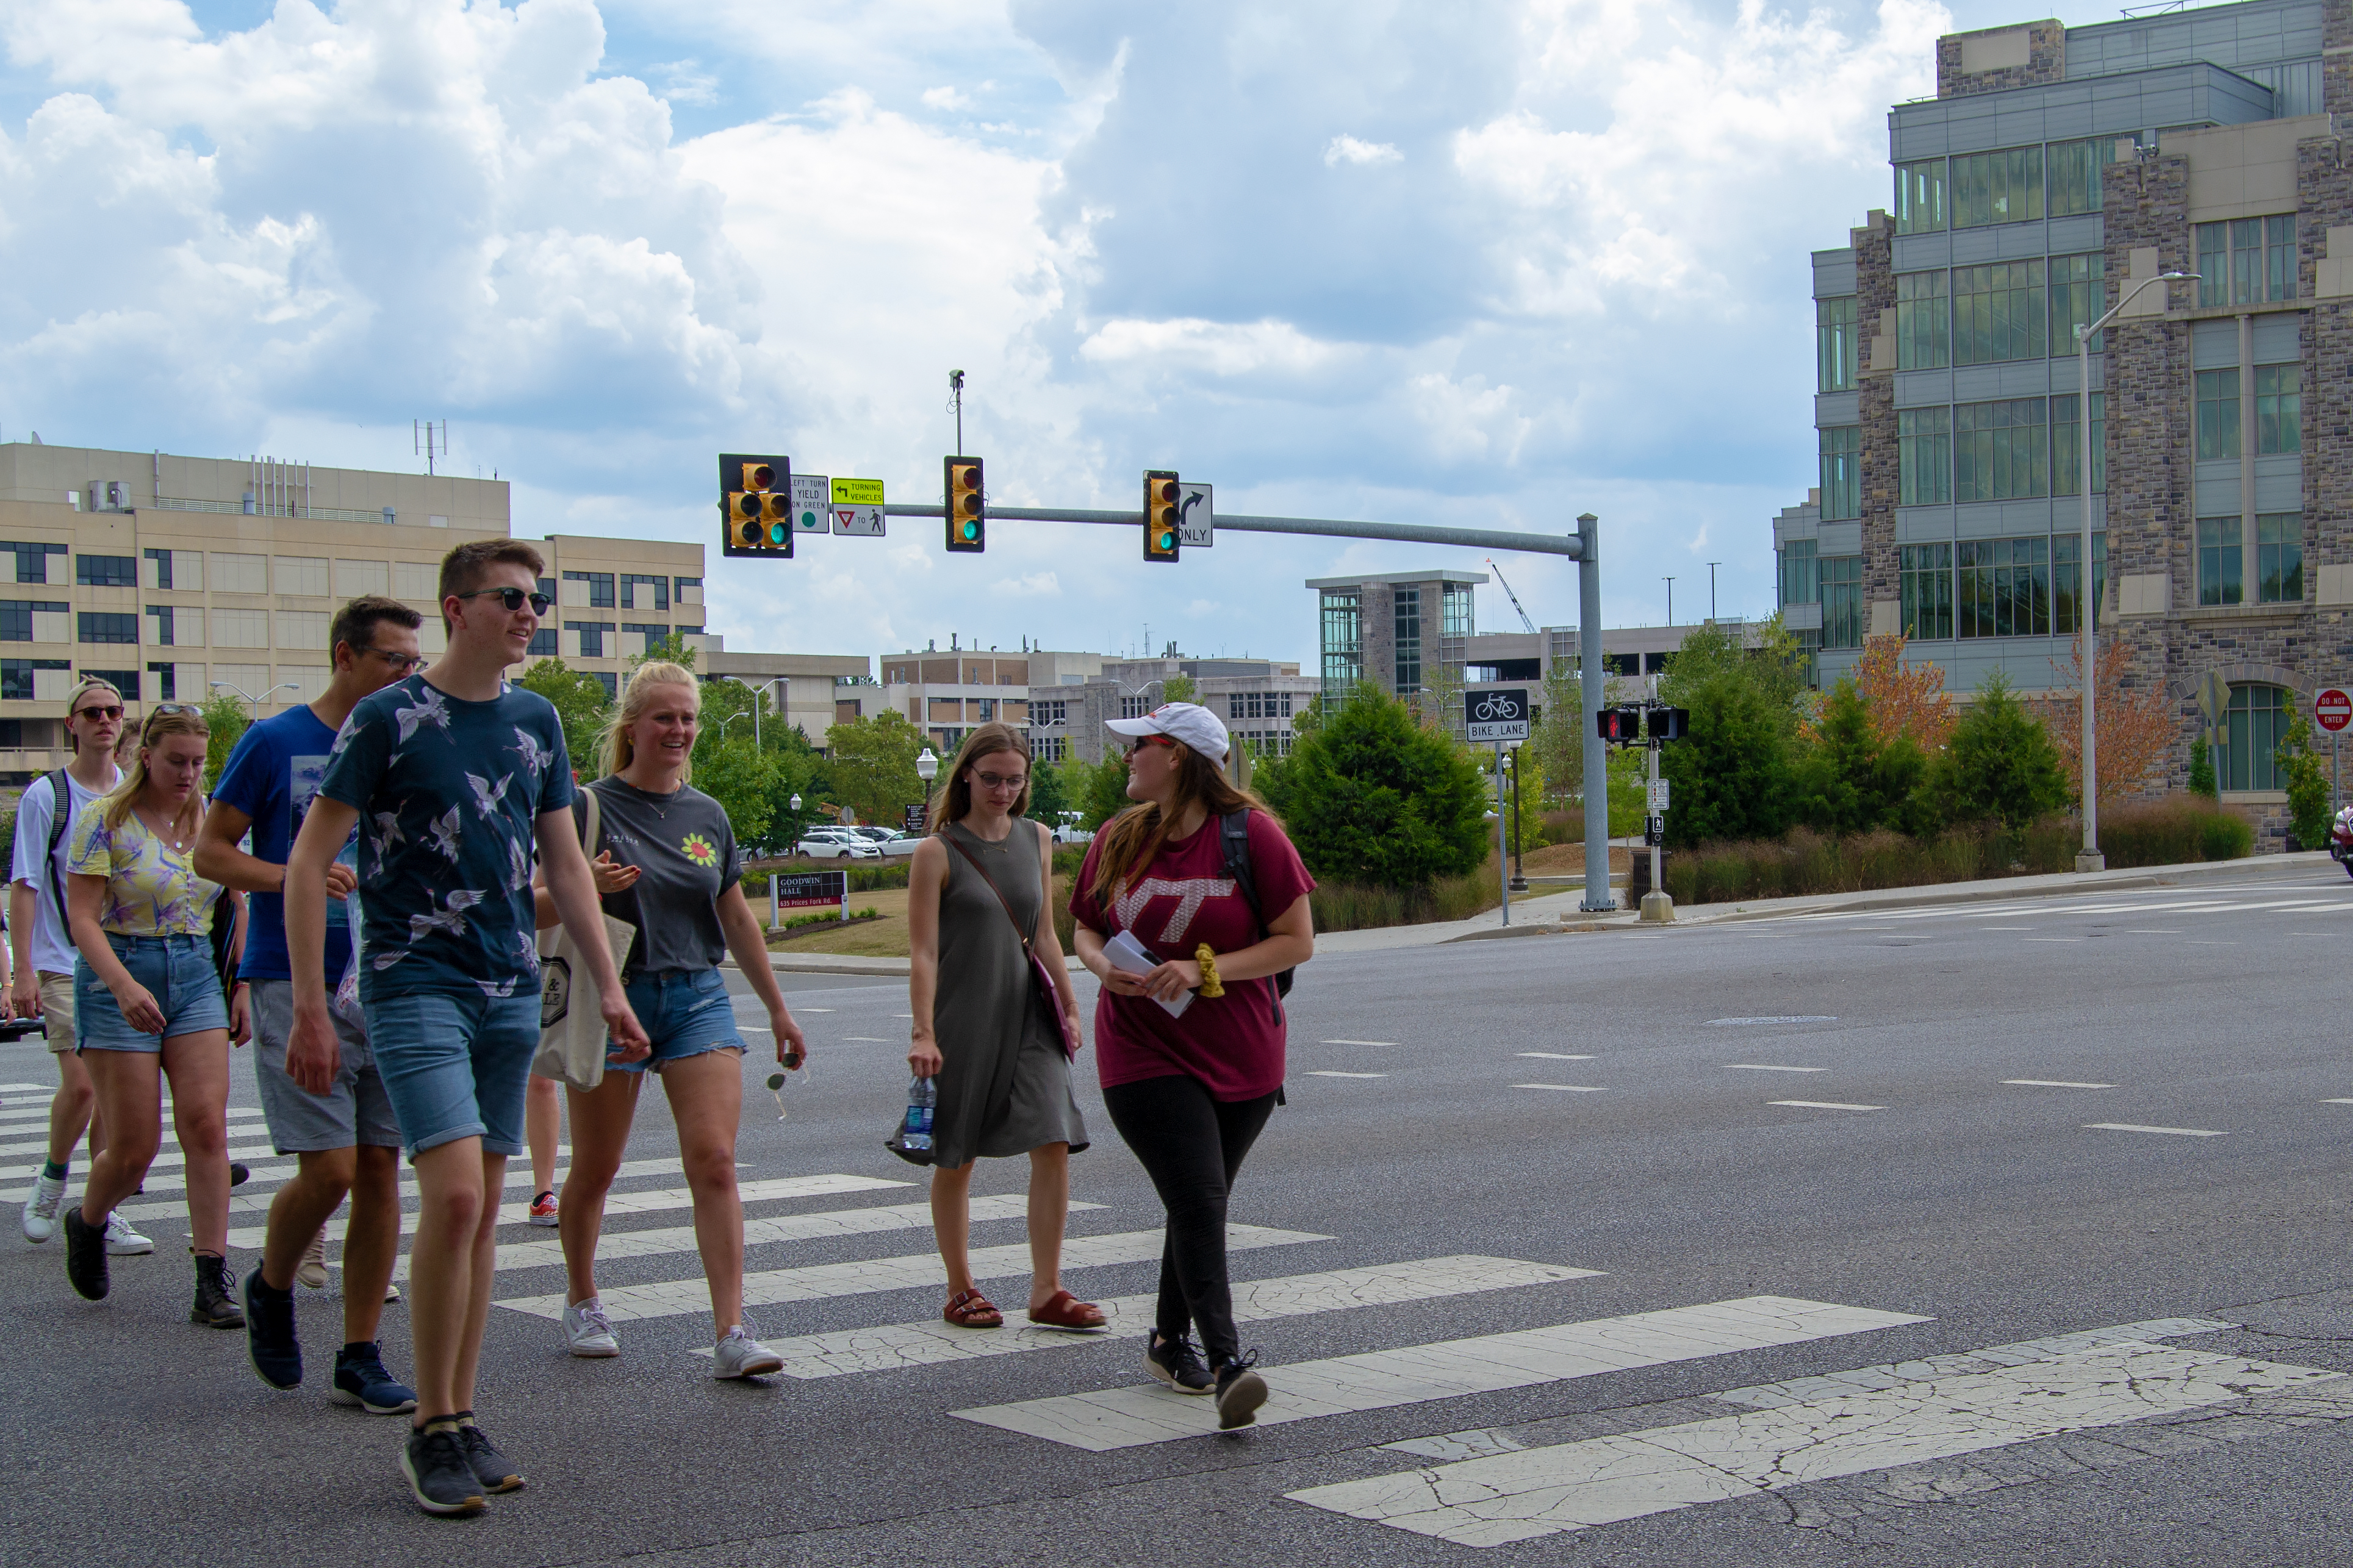 Shelly Worek (center wearing a Virginia Tech shirt) leads a group of international exchange students on a campus tour.